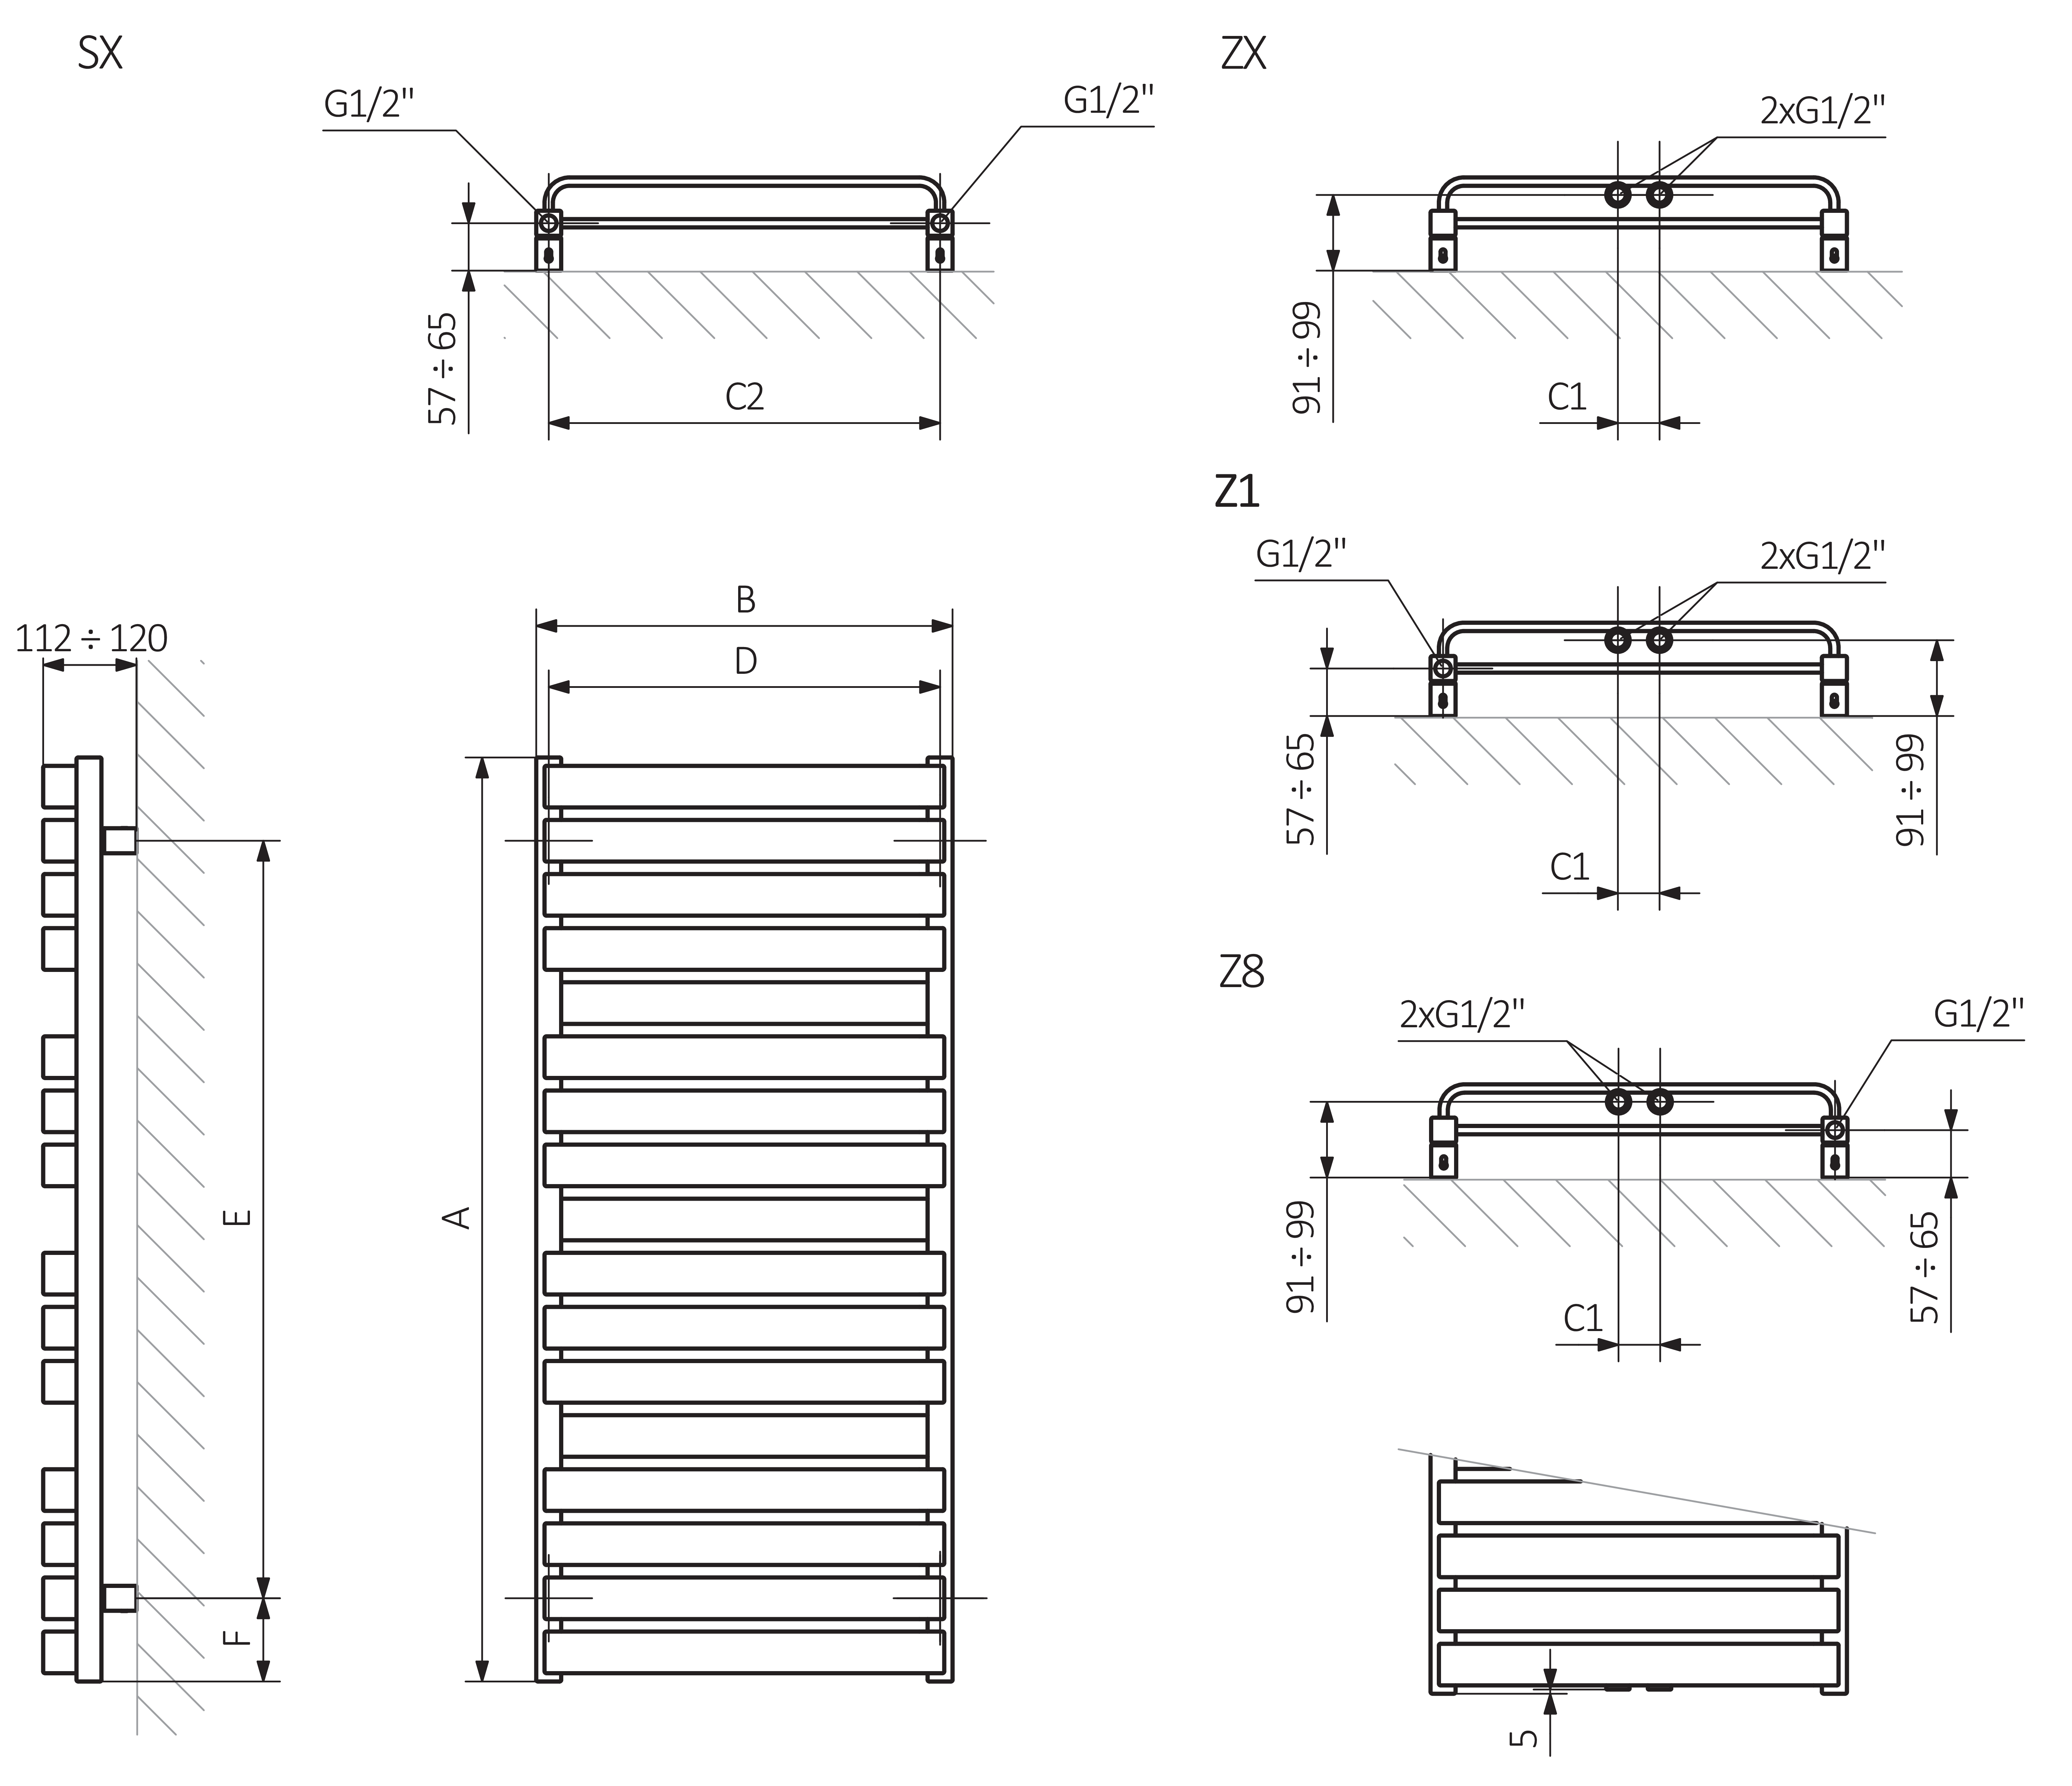 A – Height, B – Width, C1-C5 – Distance between pipe centres, D – Horizontal distance between mounting bracket centres, E – Vertical distance between mounting brackets, F – Distance between a mounting bracket and the bottom of the radiator